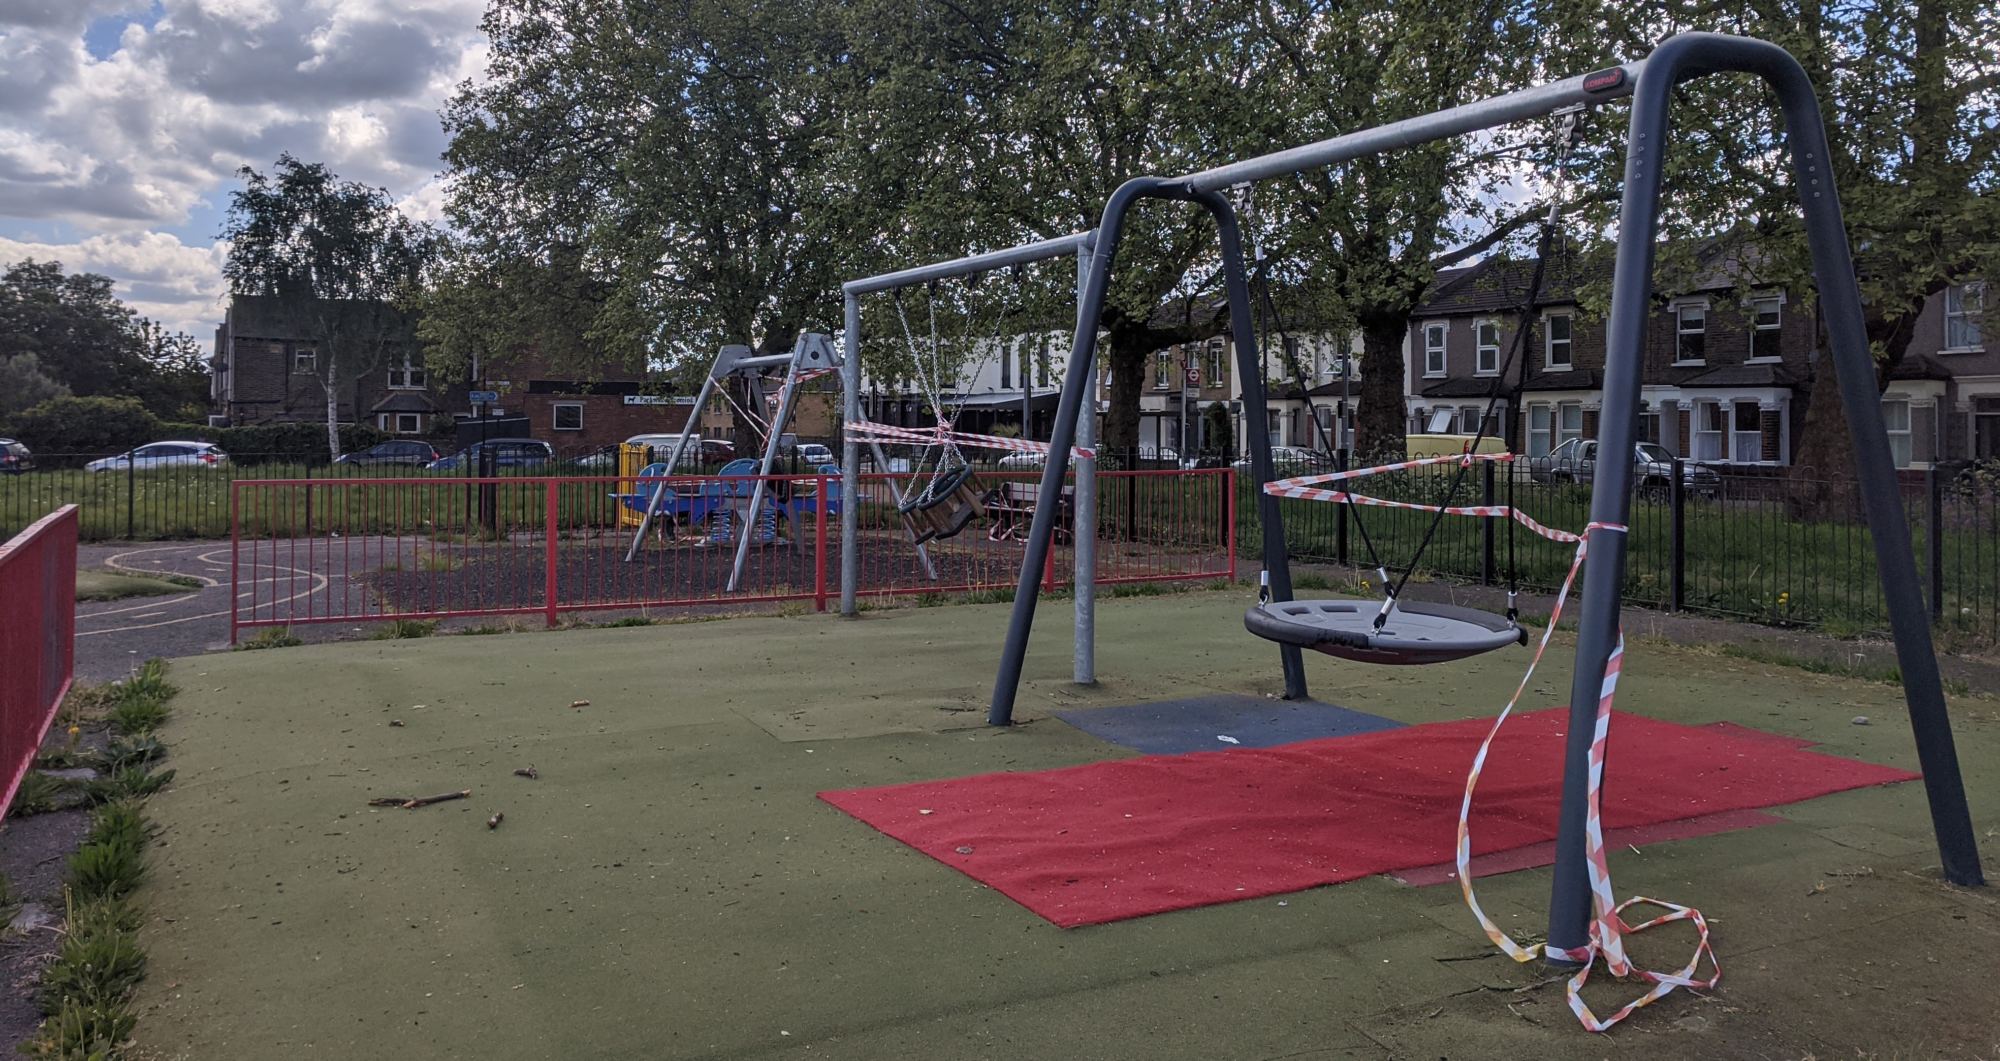 Play equipment cordoned off in a park in London.